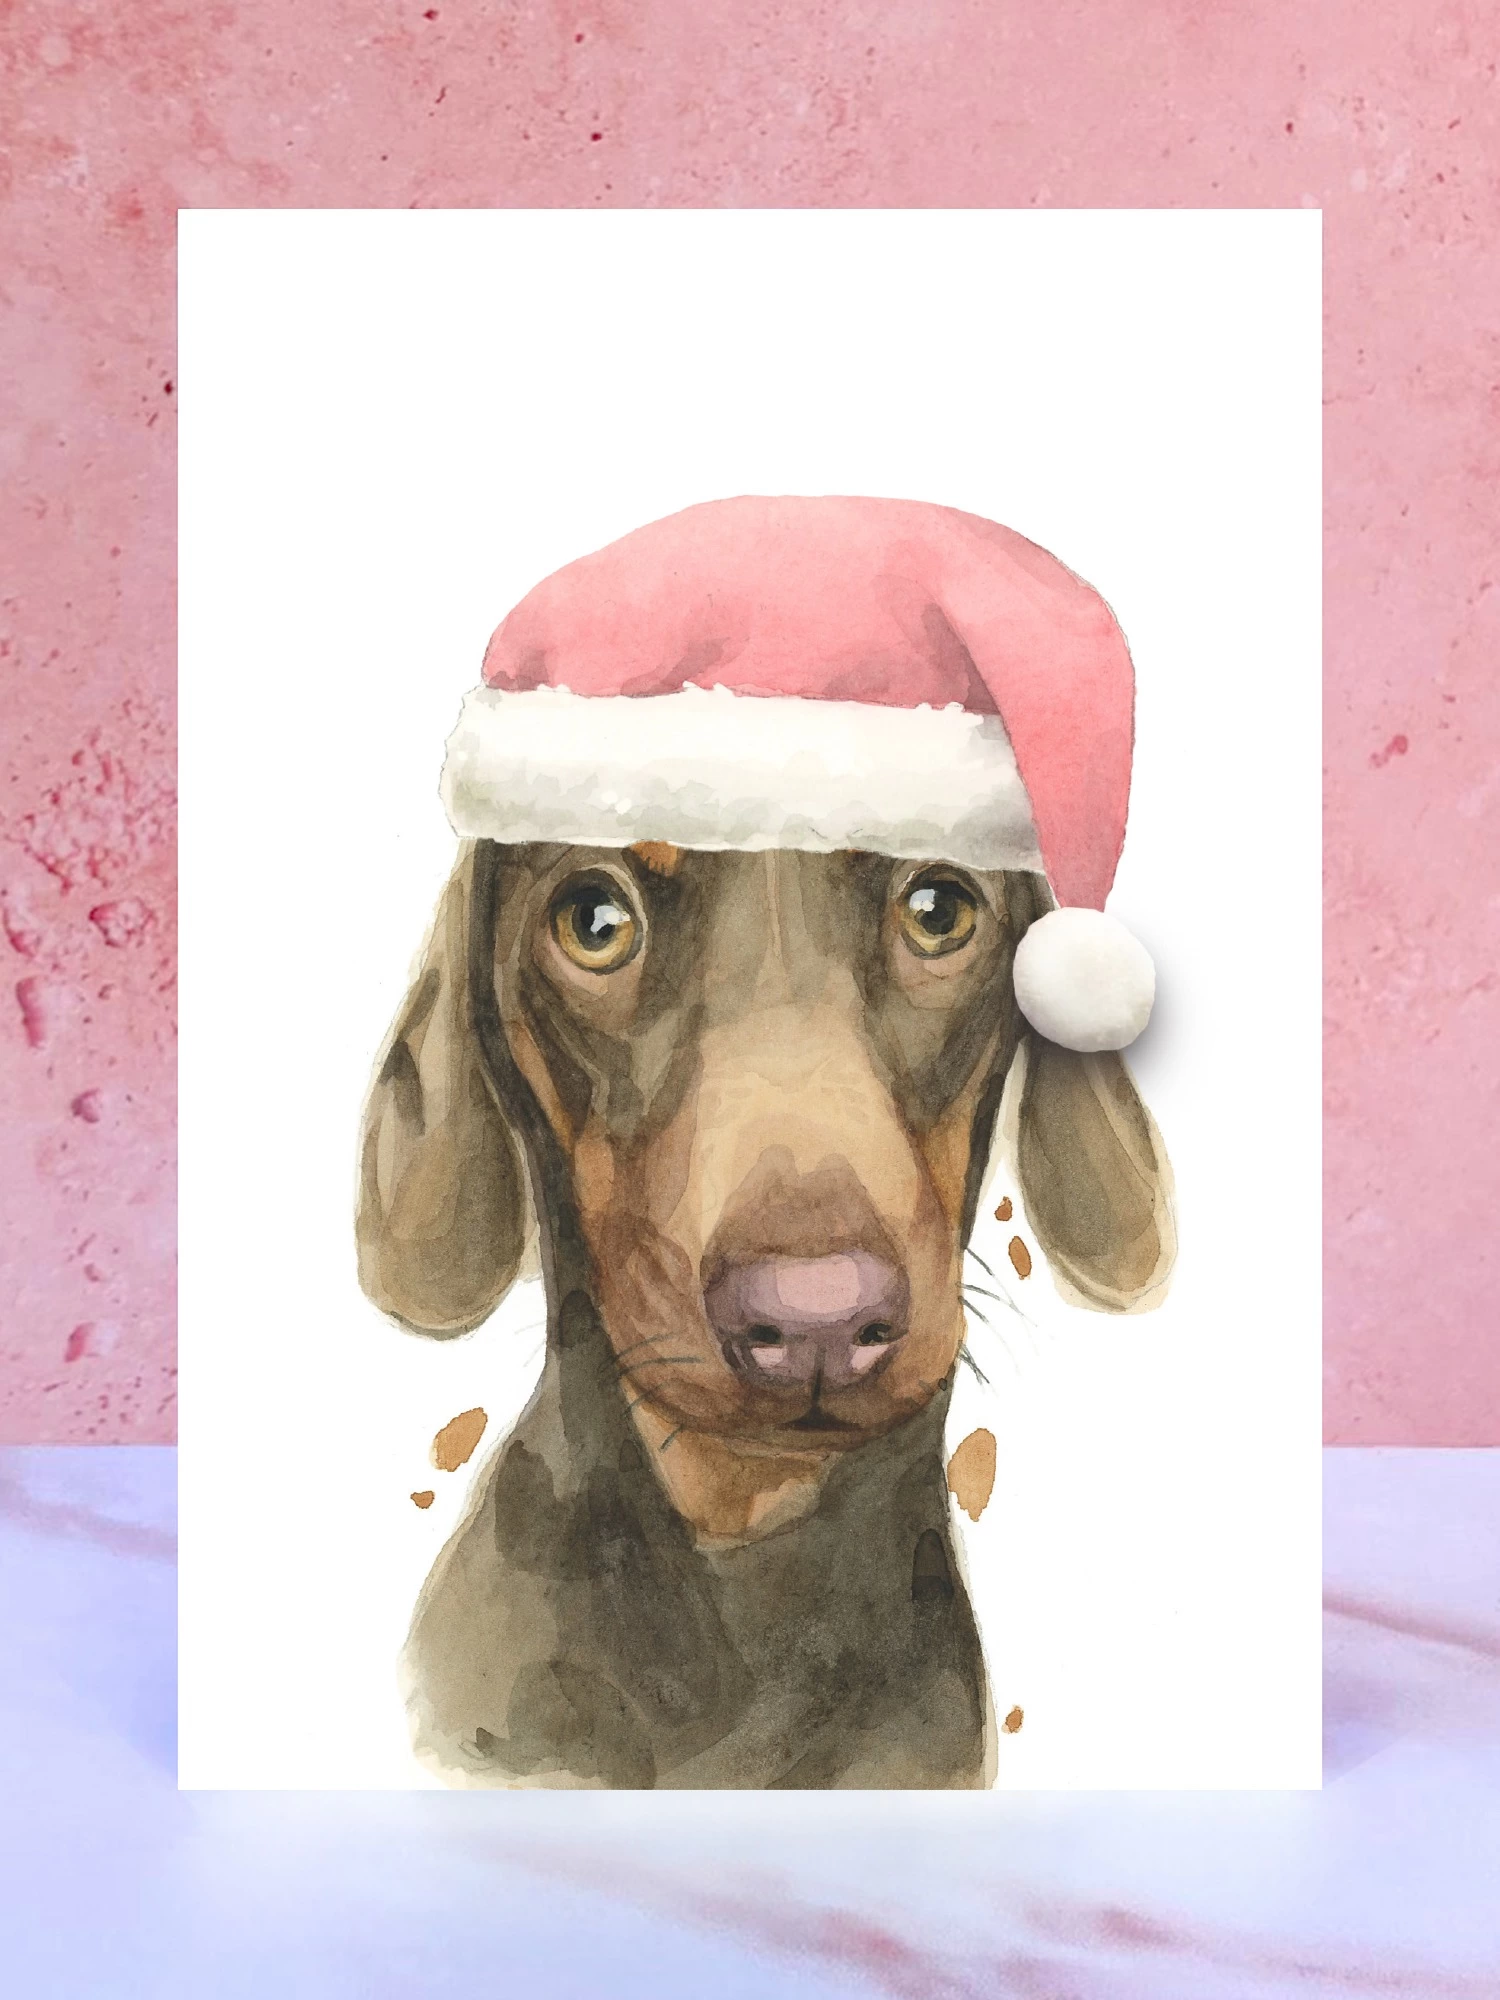 A Christmas card featuring a hand painted design of a dachshund, stood upright on a marble surface.